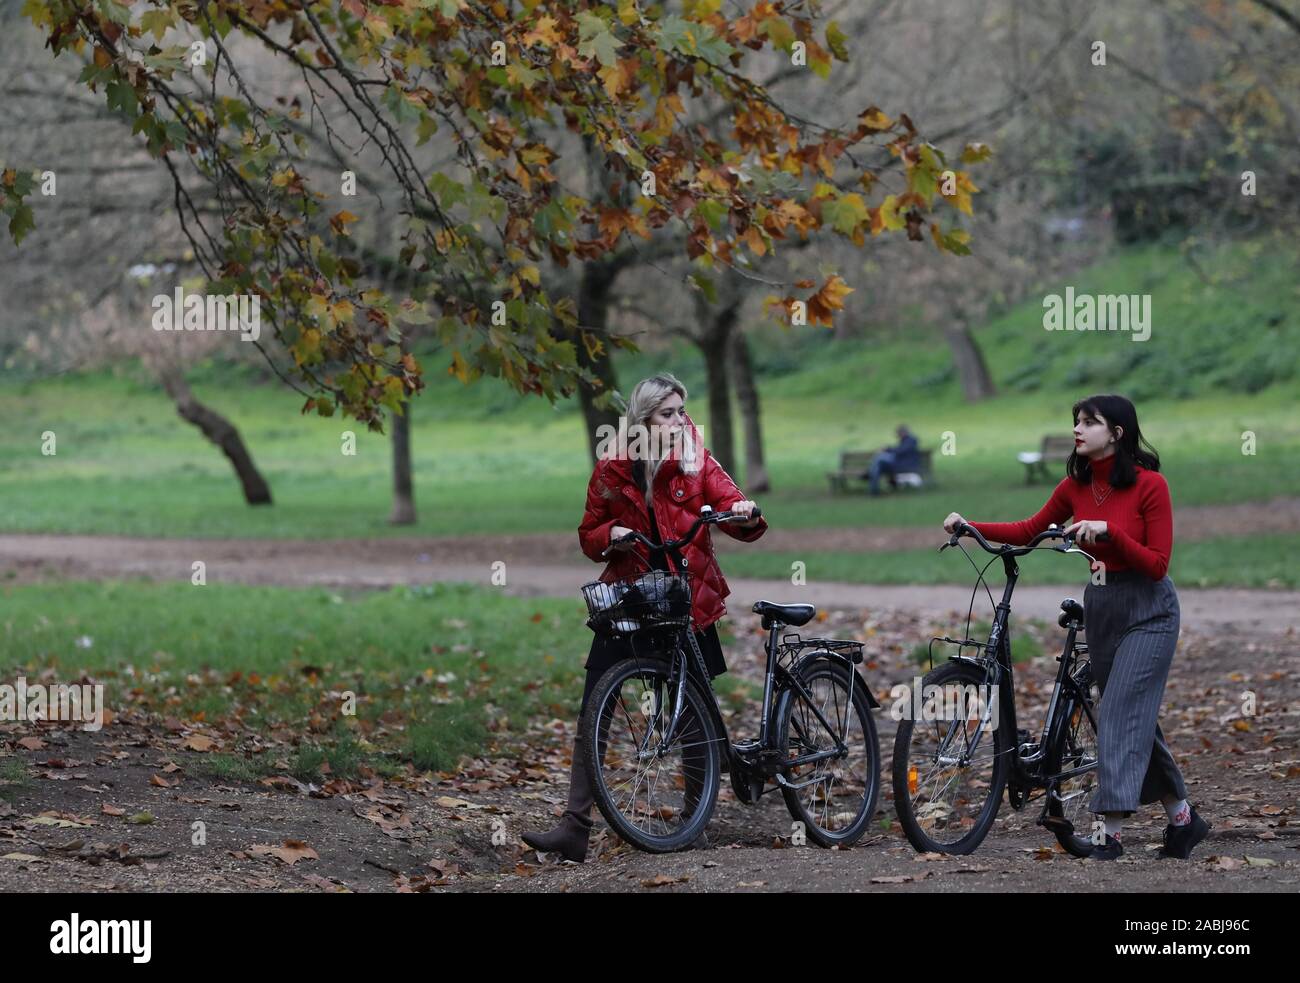 Beijing Italy 26th Nov 19 Two Women Chat In Villa Borghese Park In Rome Italy Nov 26 19 Credit Cheng Tingting Xinhua Alamy Live News Stock Photo Alamy